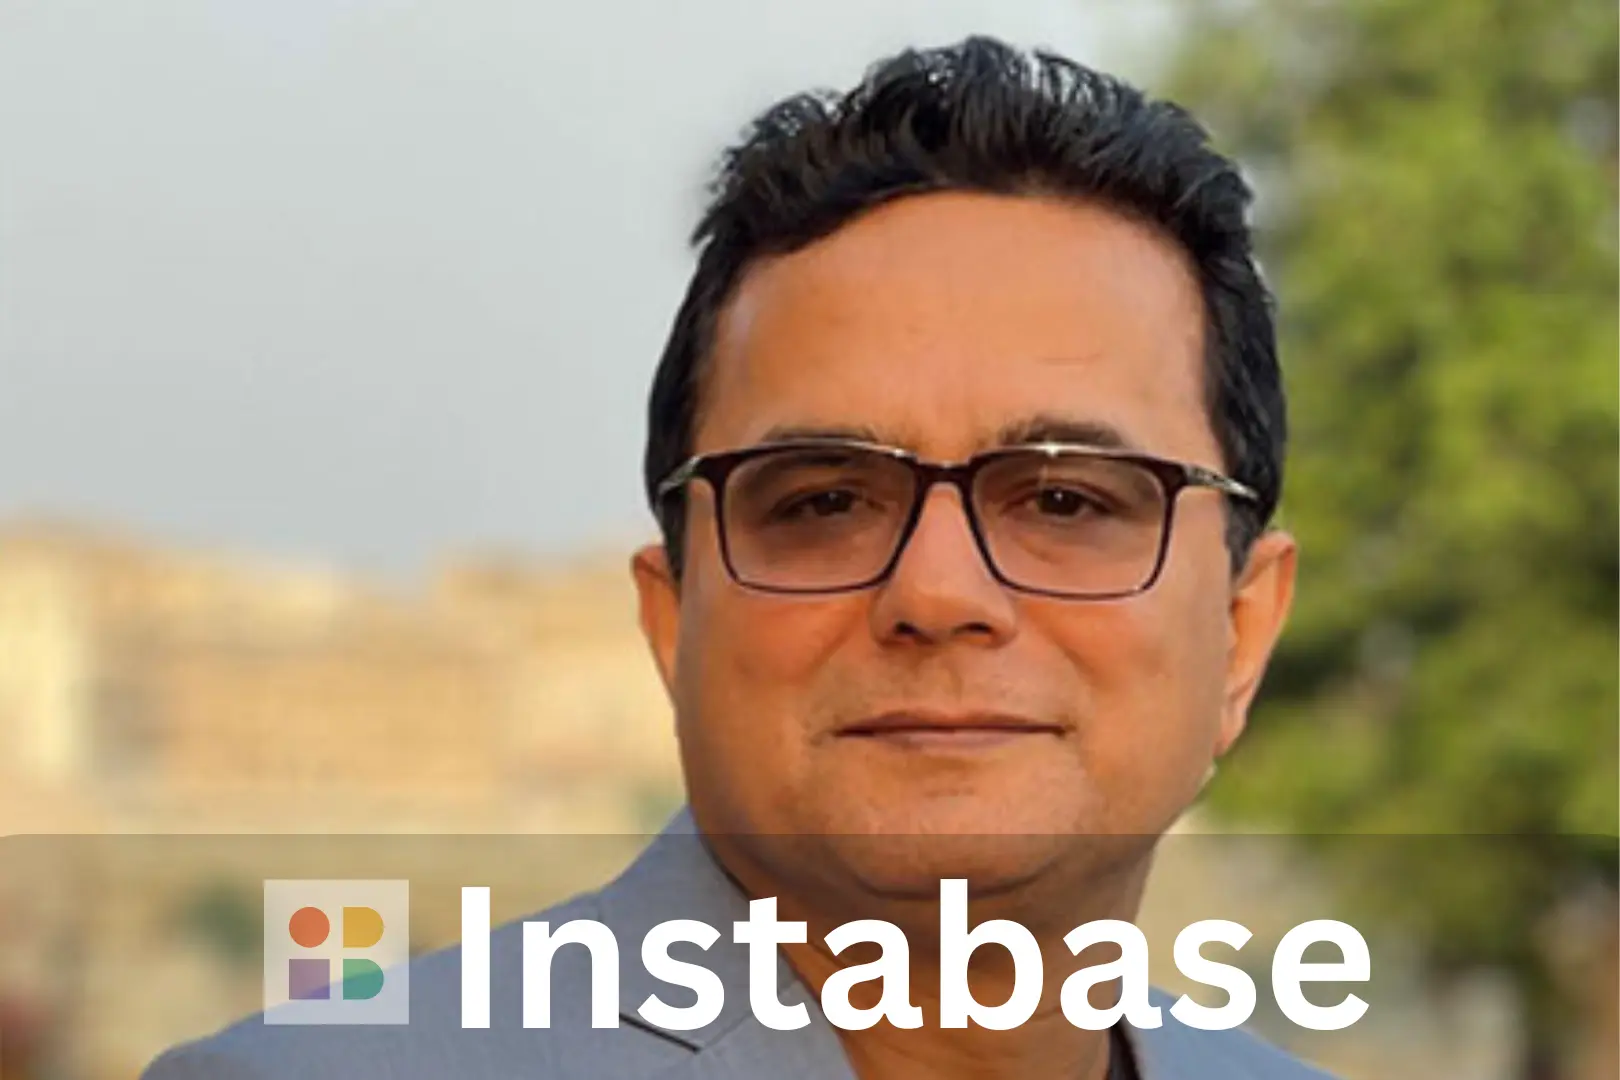 Instabase: A leading AI company in Silicon Valley Appoints Deepak Sharma to Advisory Board to Drive Expansion in India.